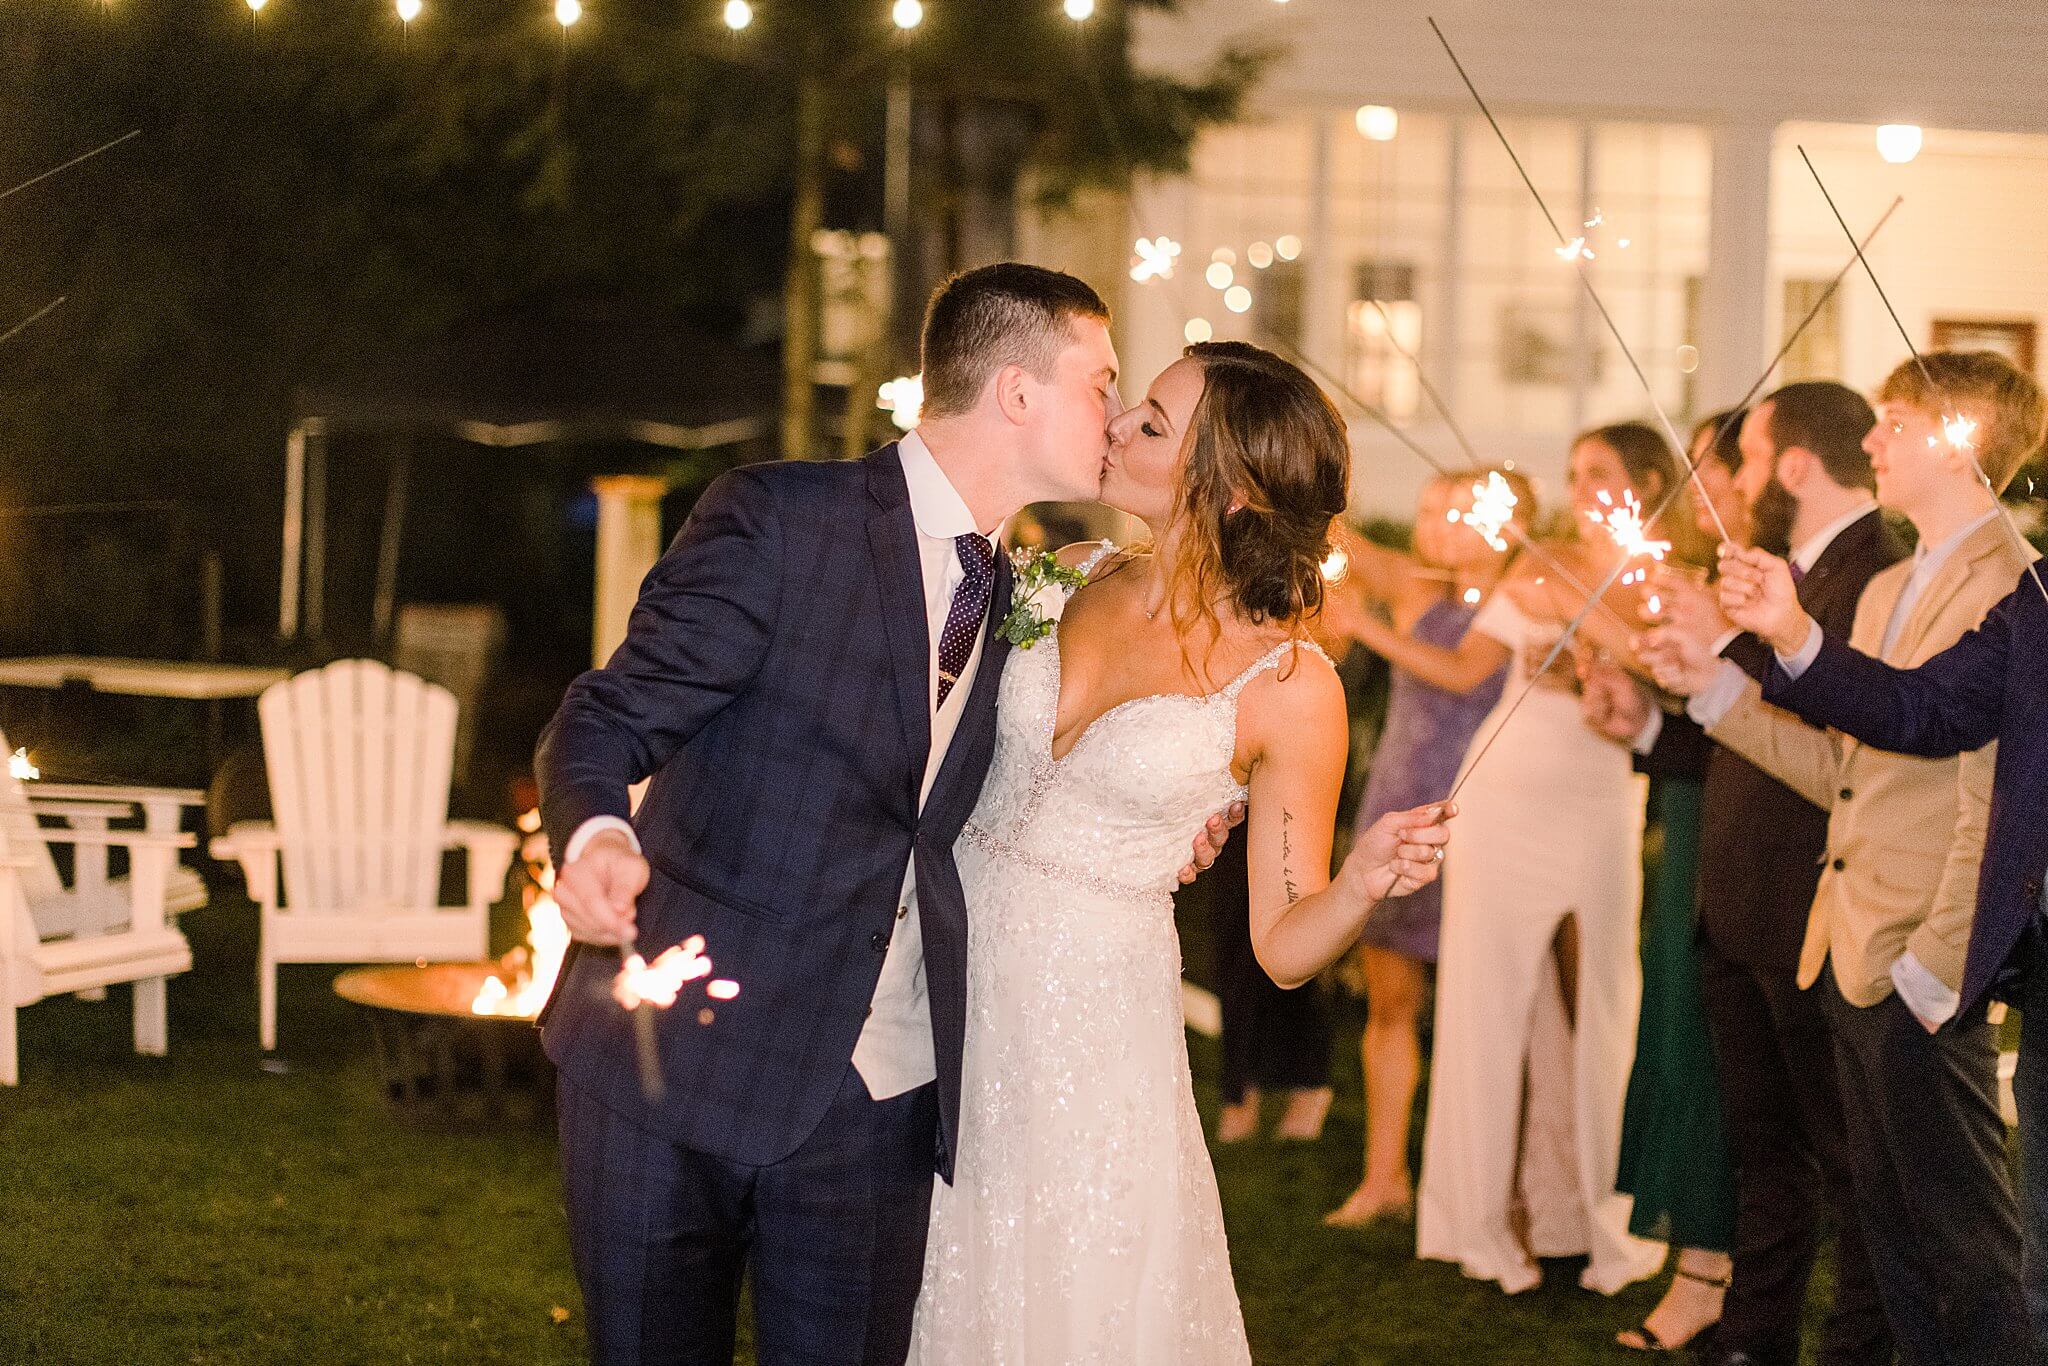 Bride & Groom kiss during sparkler exit at Intimate Northern Michigan Wedding.